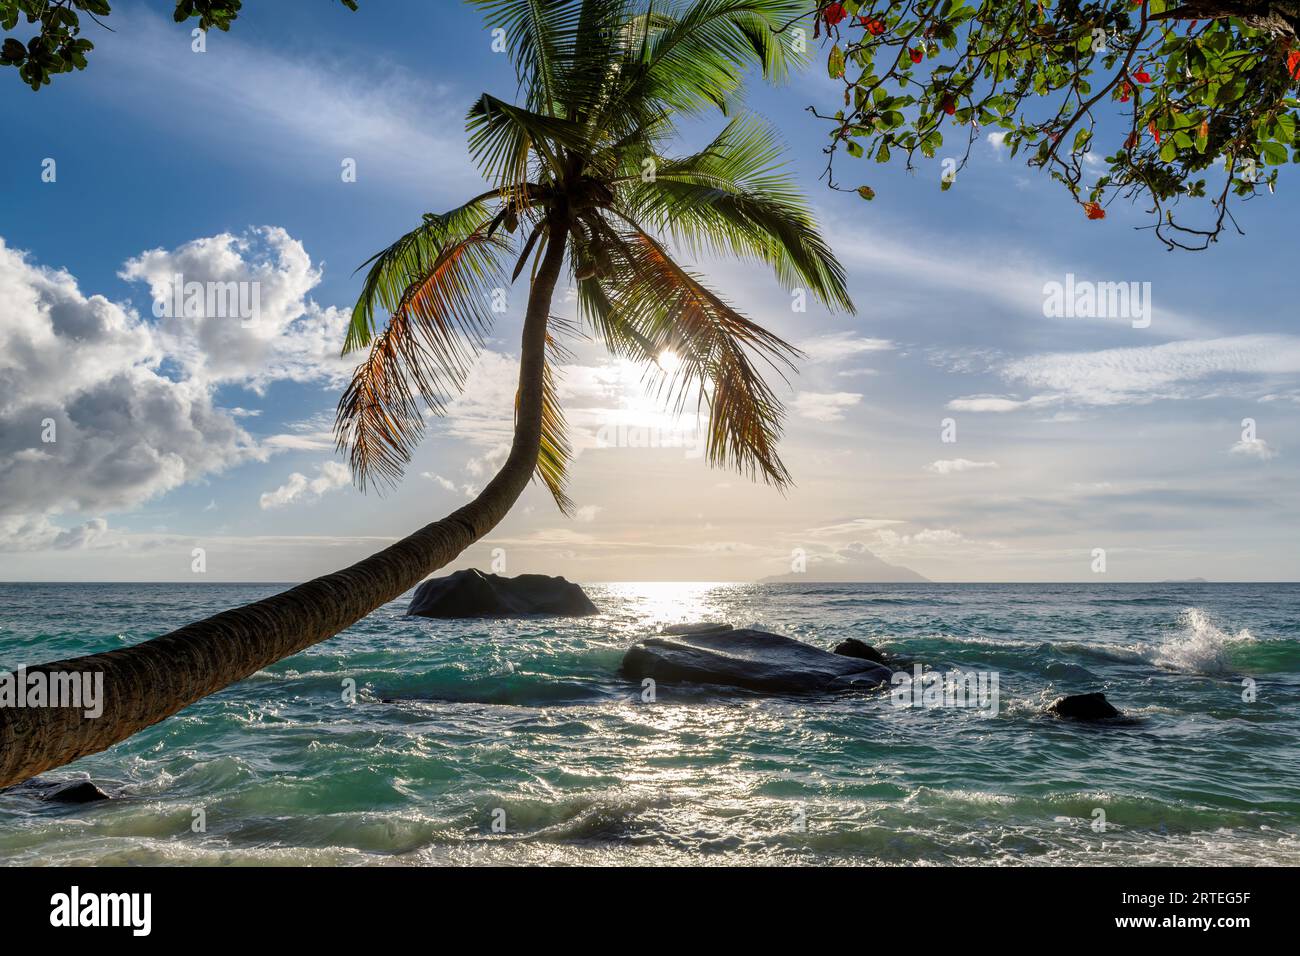 Coco palm at sunset beach over tropical ocean. Stock Photo